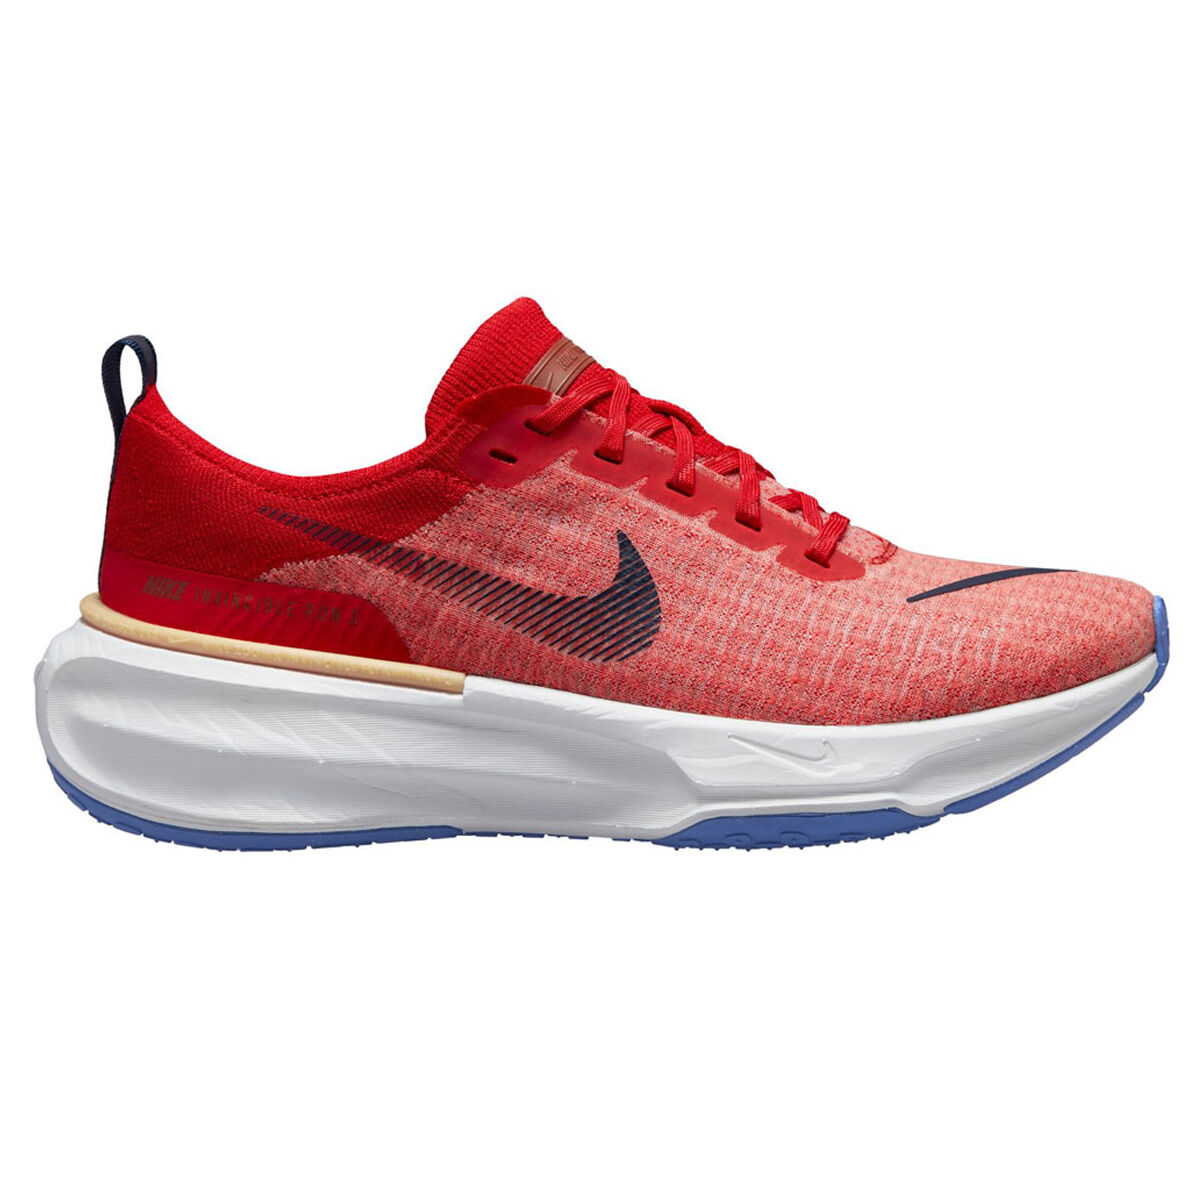 Nike ZoomX Invincible Run Flyknit 3 Mens Running Shoes | Rebel Sport